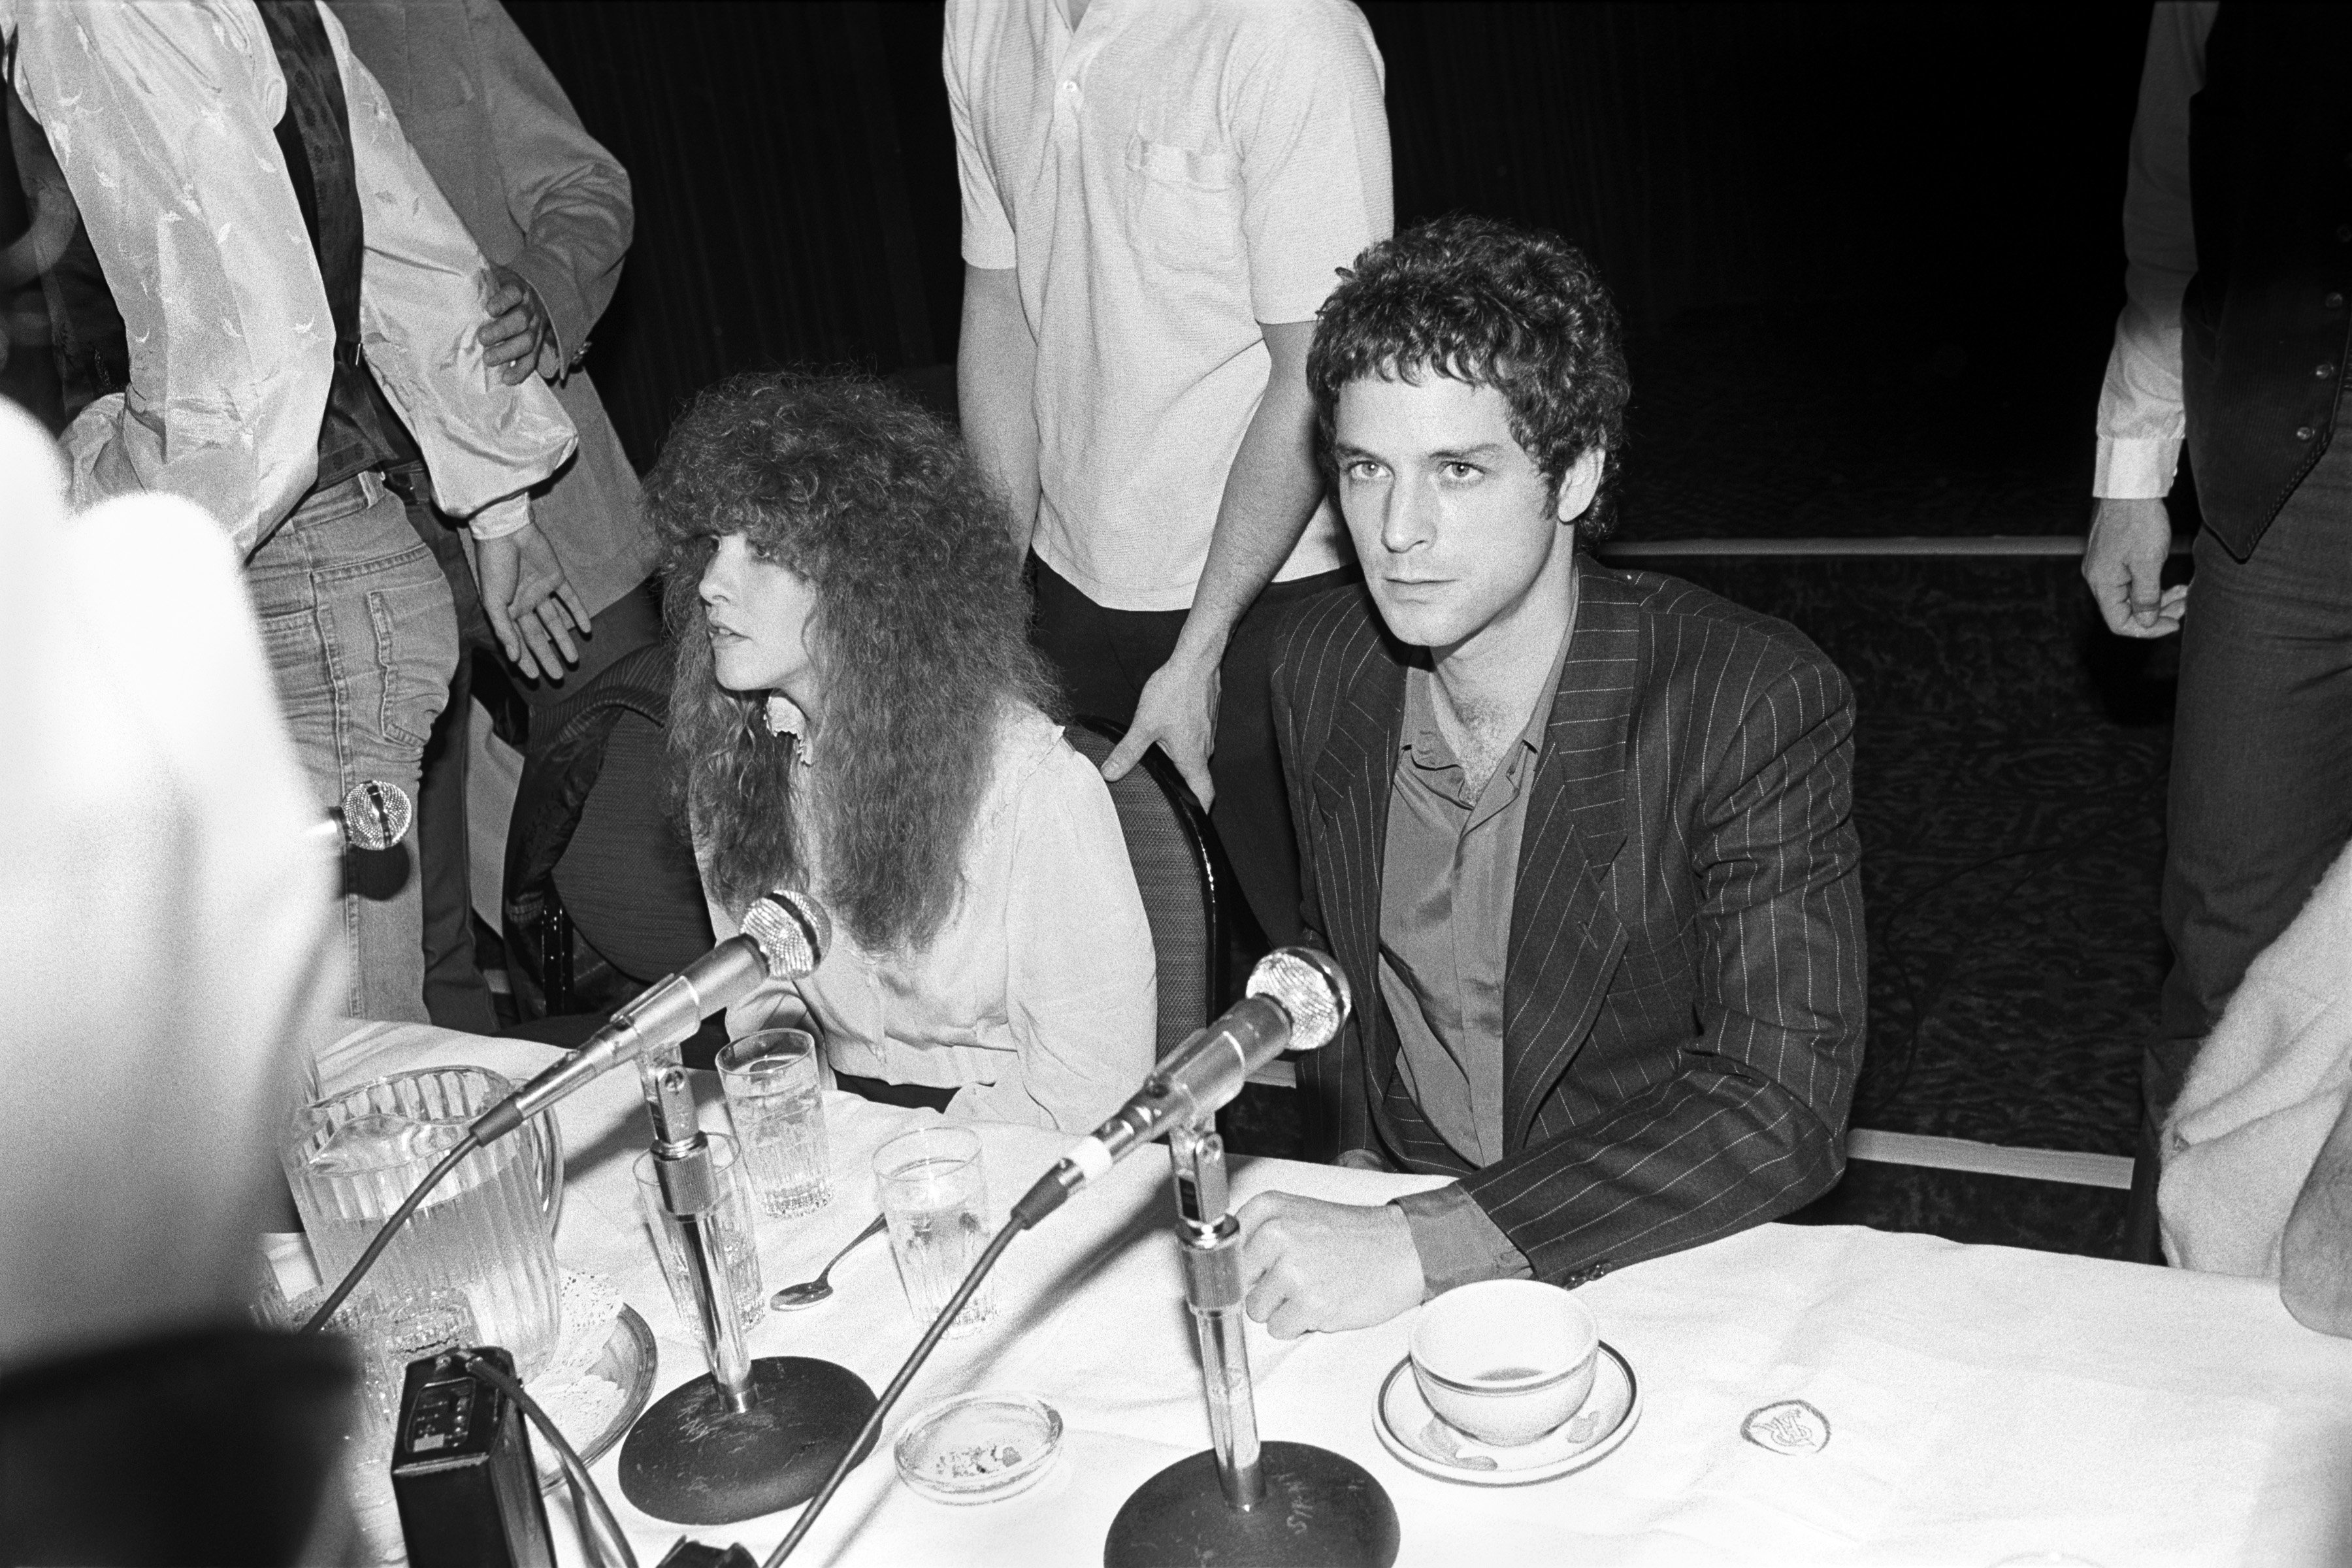 Stevie Nicks and Lindsey Buckingham sit at a table with microphones.